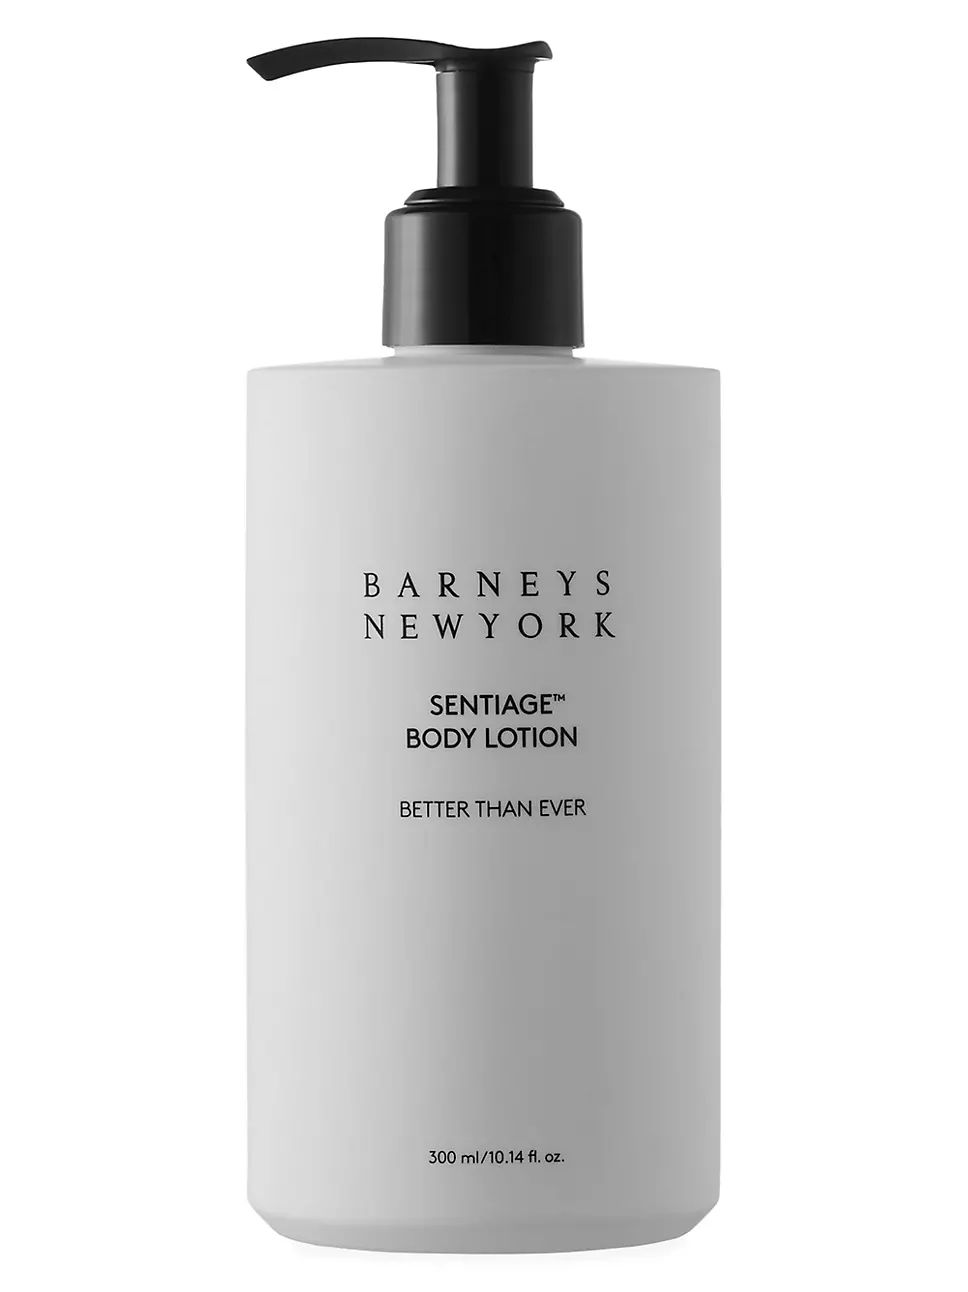 Barneys New York Beauty Sentiage Body Lotion Better Than Ever | Saks Fifth Avenue